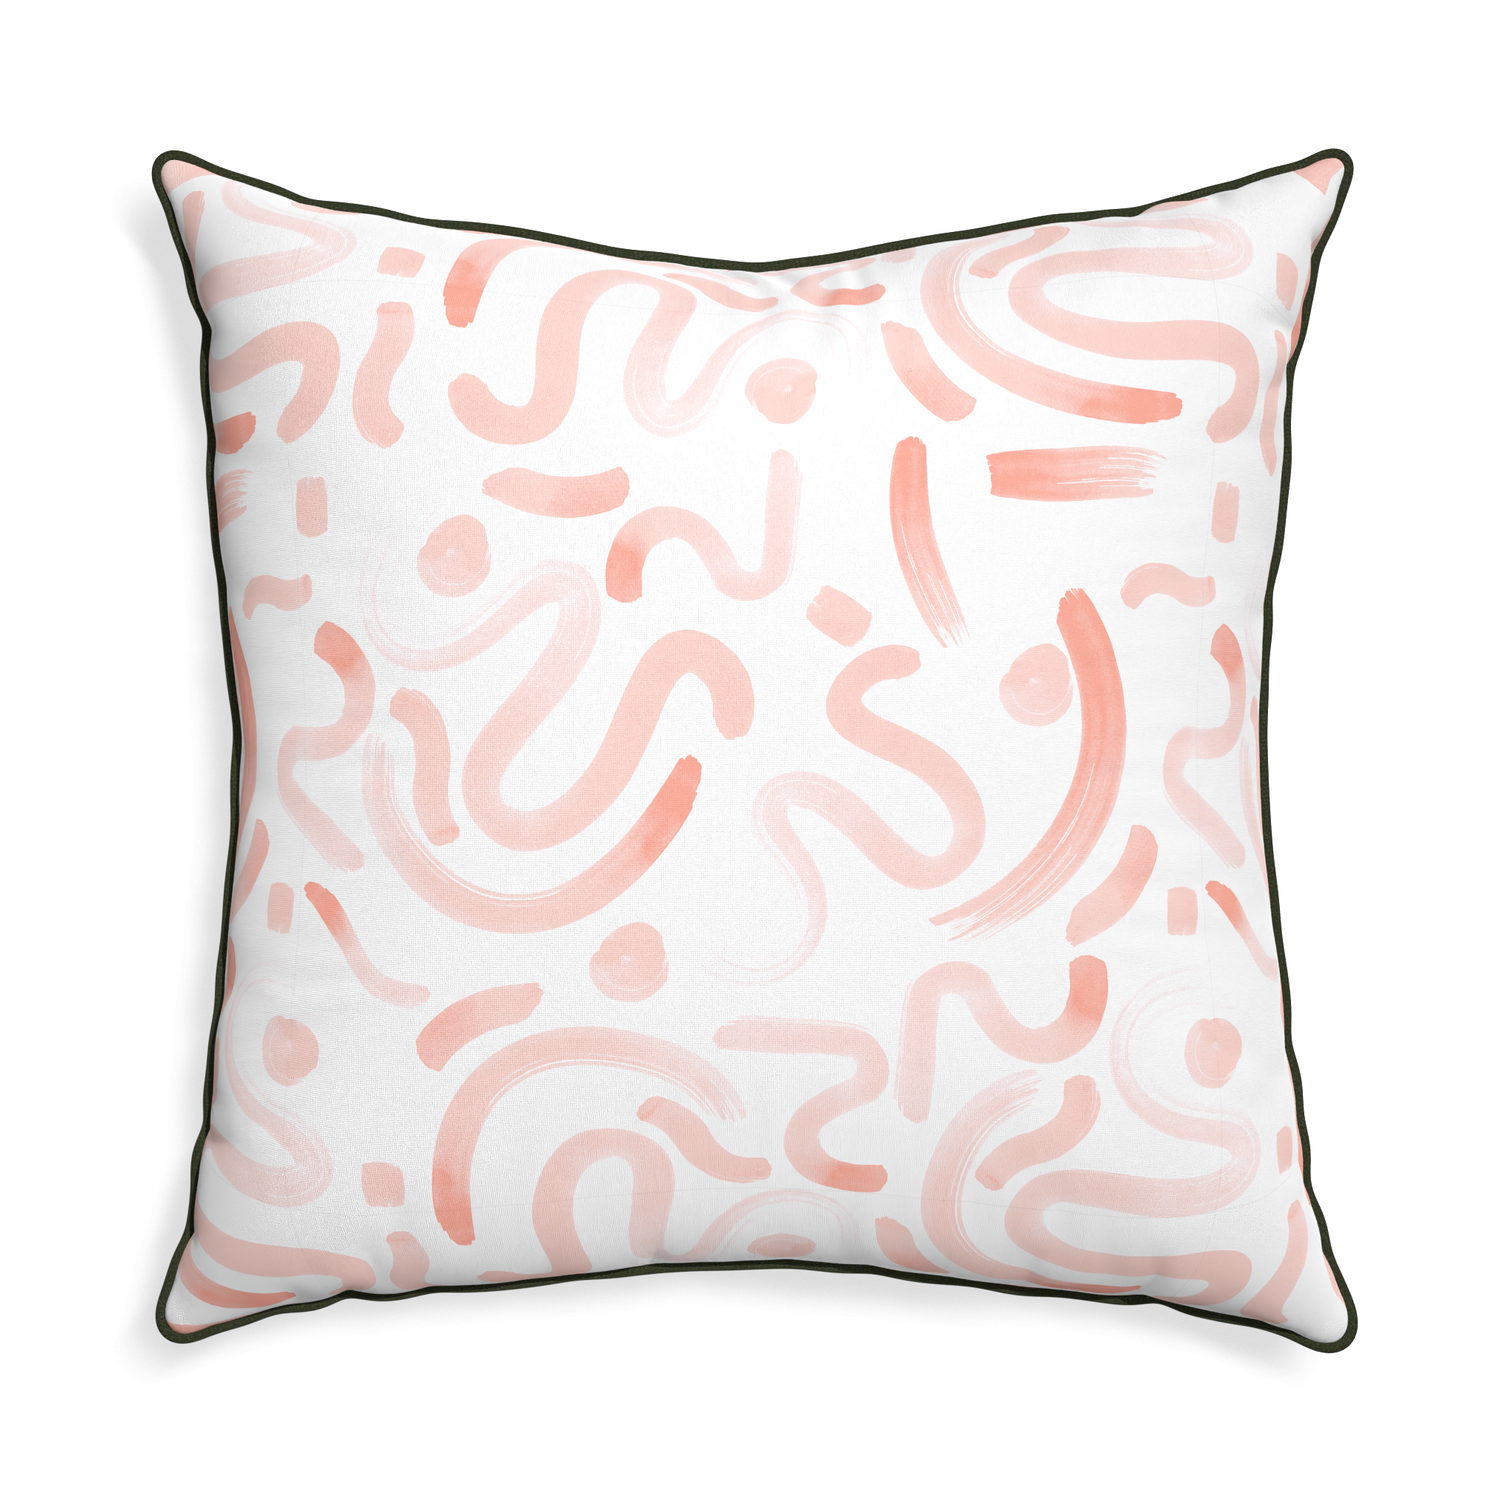 Euro-sham hockney pink custom pink graphicpillow with f piping on white background